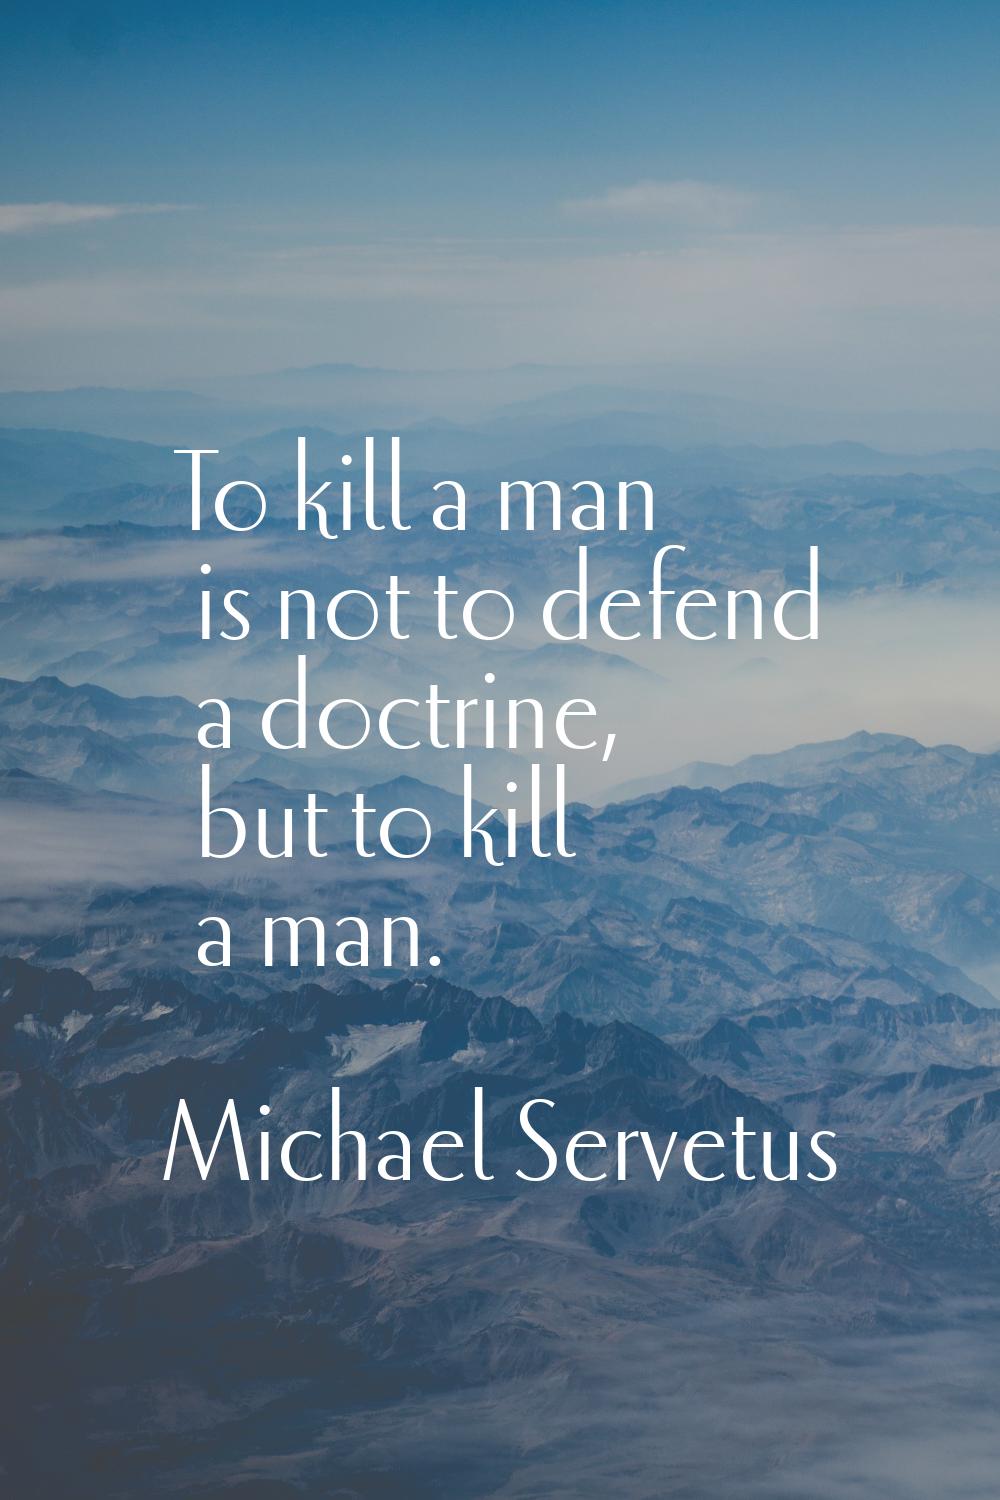 To kill a man is not to defend a doctrine, but to kill a man.